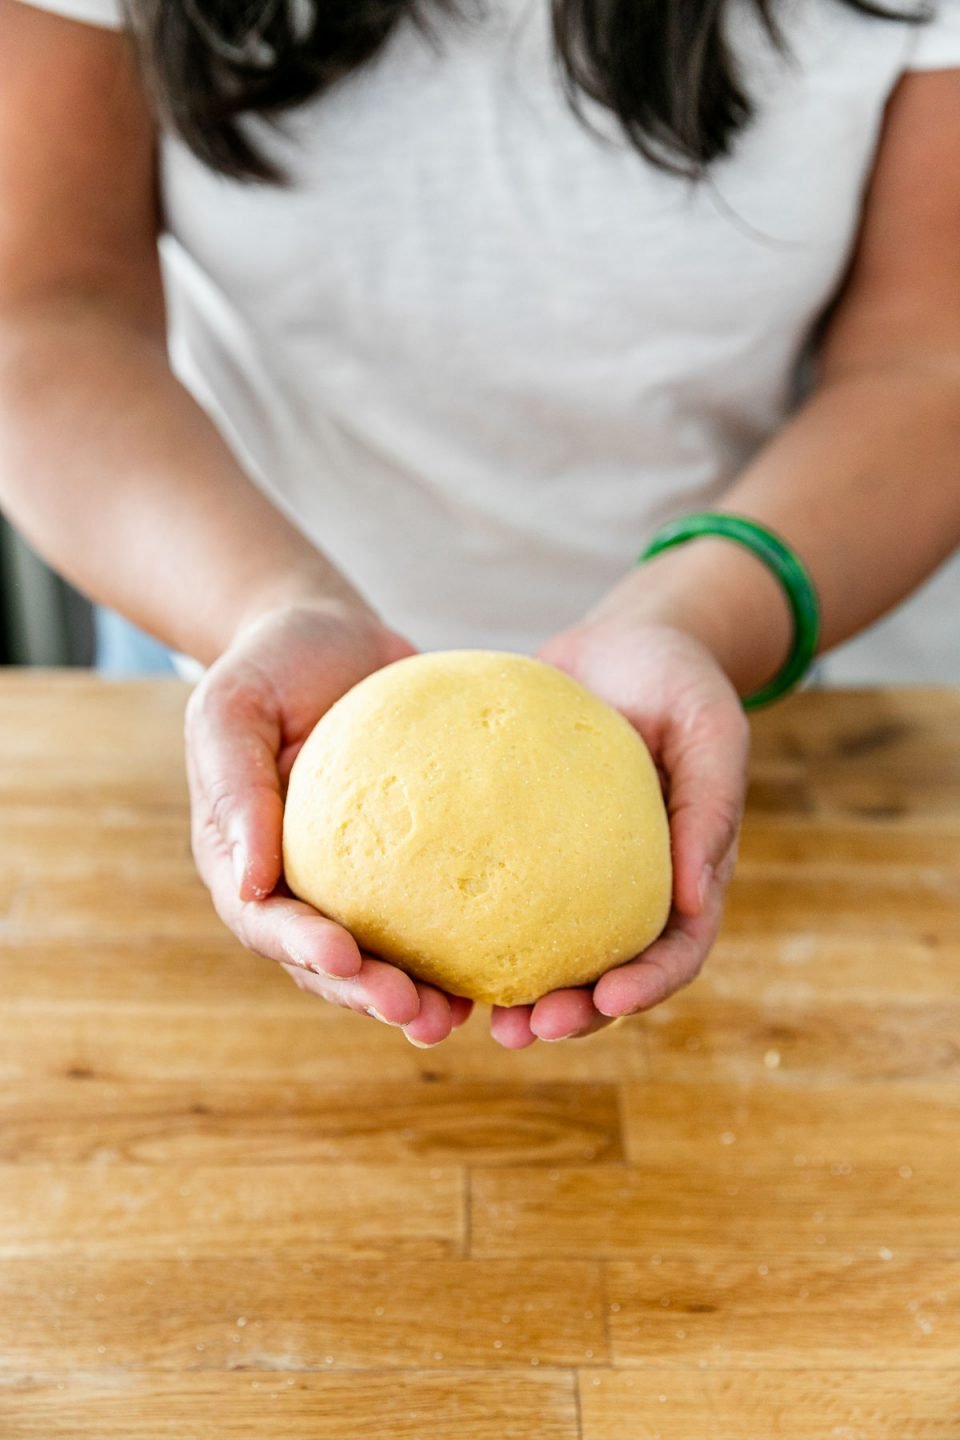 How to Make Homemade Pasta, Step 3: Jess of Plays Well With Butter holds a finished fresh pasta dough ball in both of her hands. The dough ball is smooth & supple.